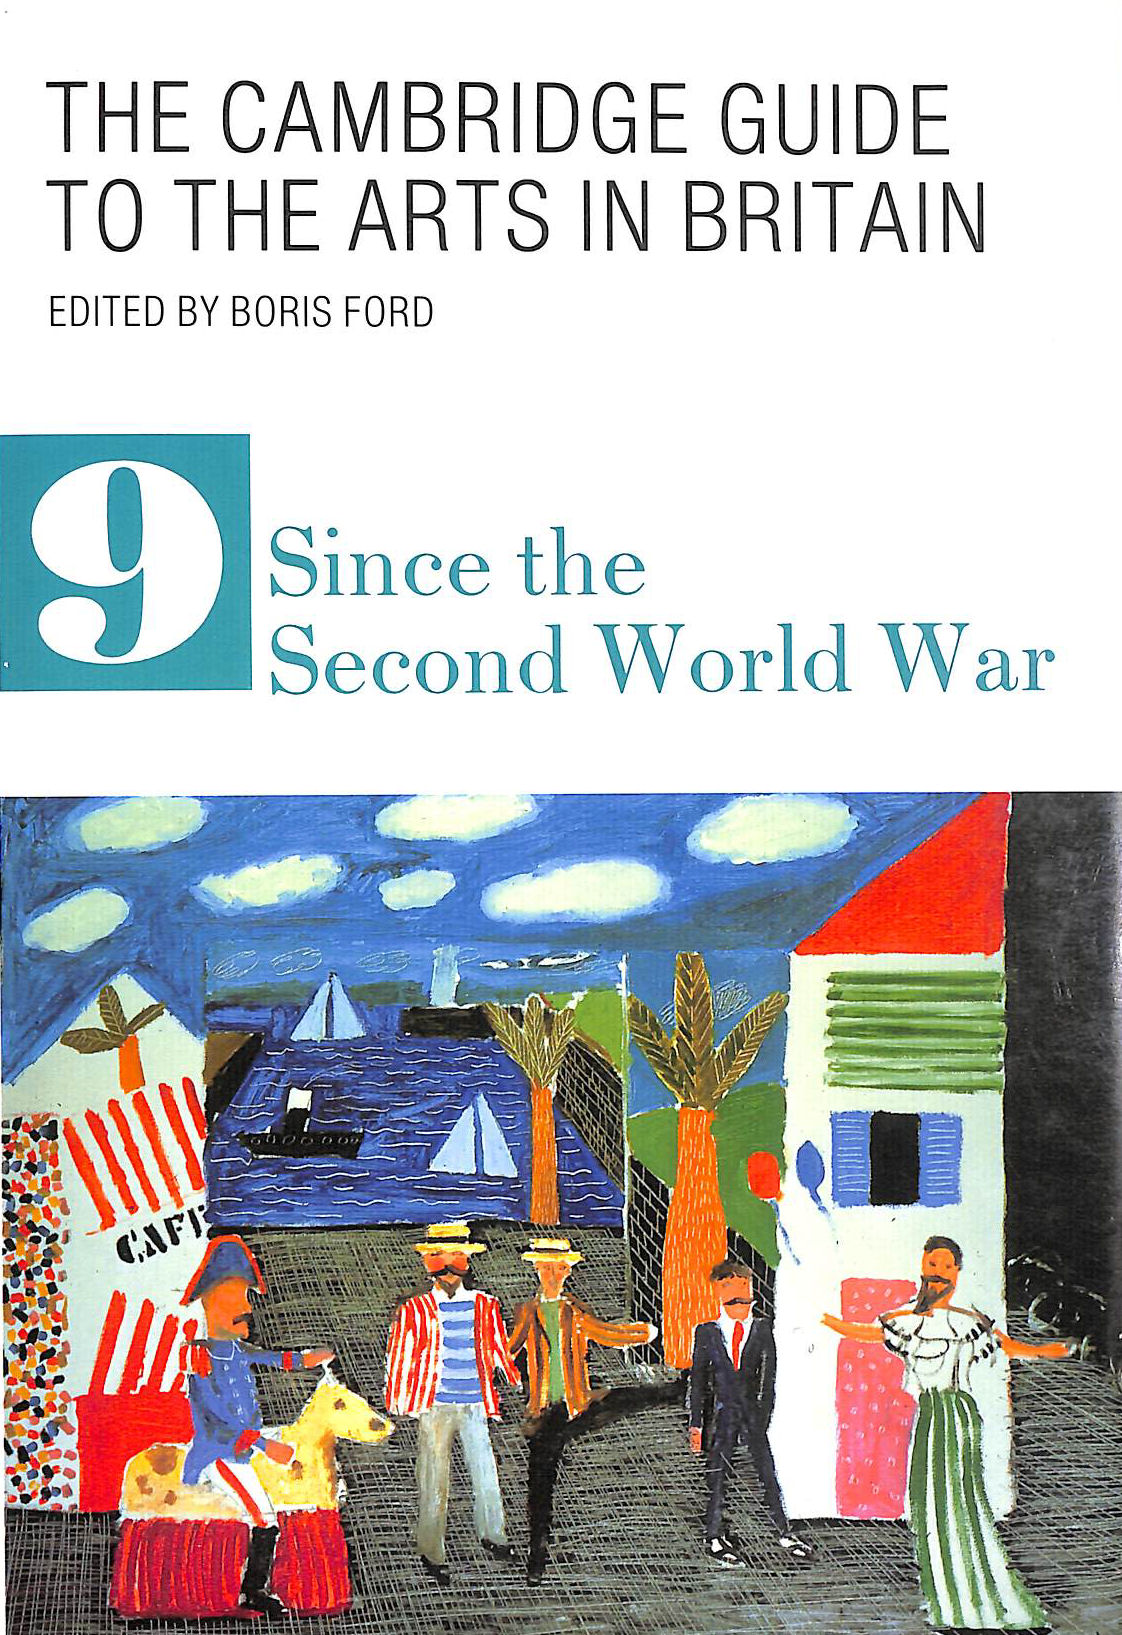 BORIS FORD [EDITOR] - The Cambridge Guide To The Arts In Britain Volume 9 Since The Second World War